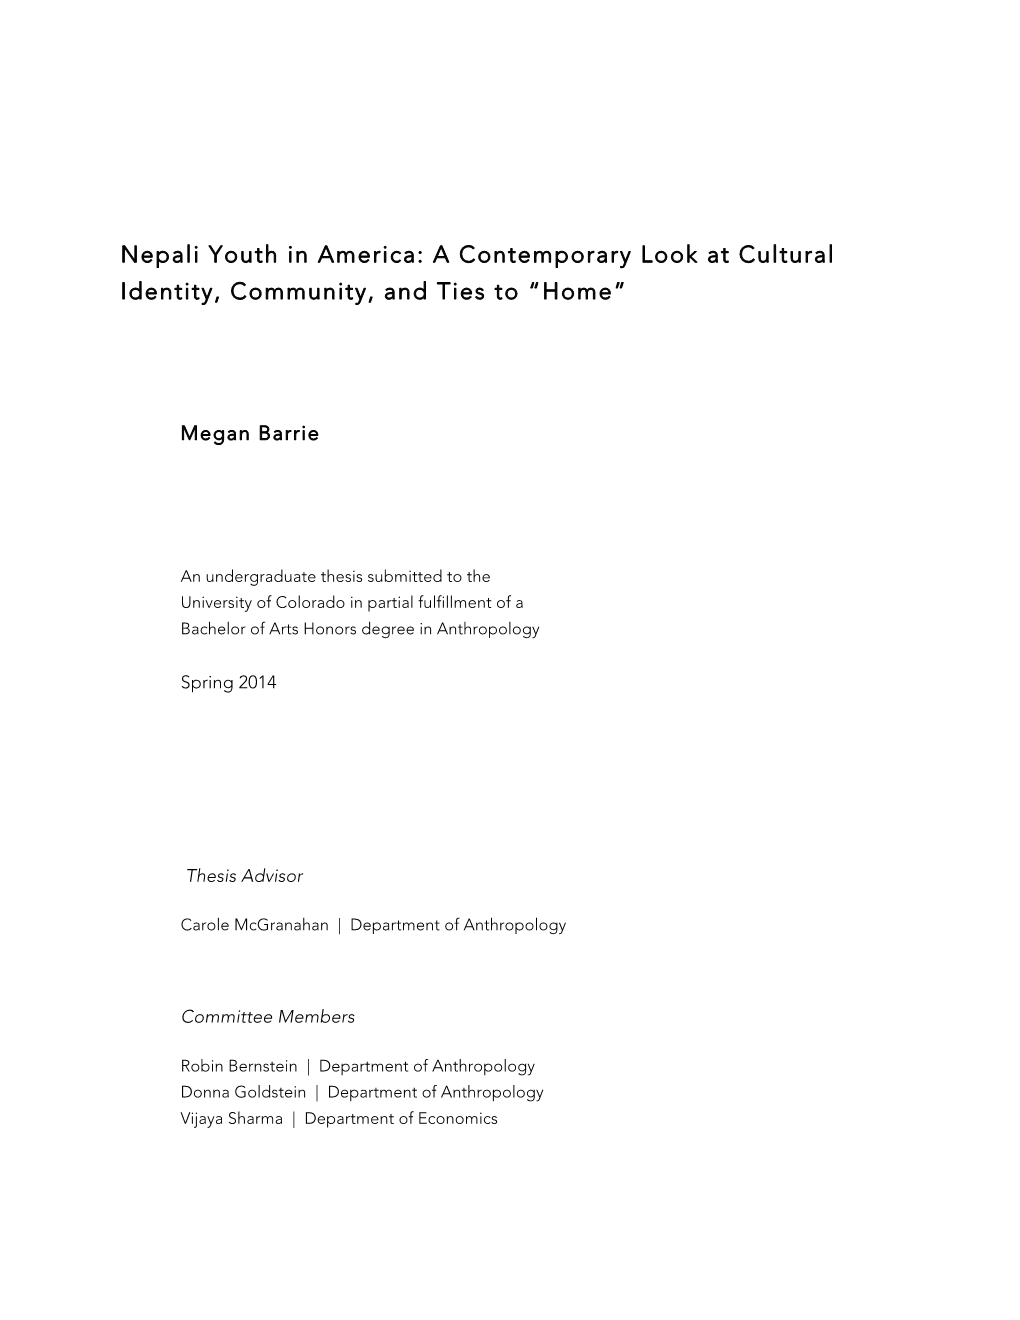 Nepali Youth in America: a Contemporary Look at Cultural Identity, Community, and Ties to “Home”